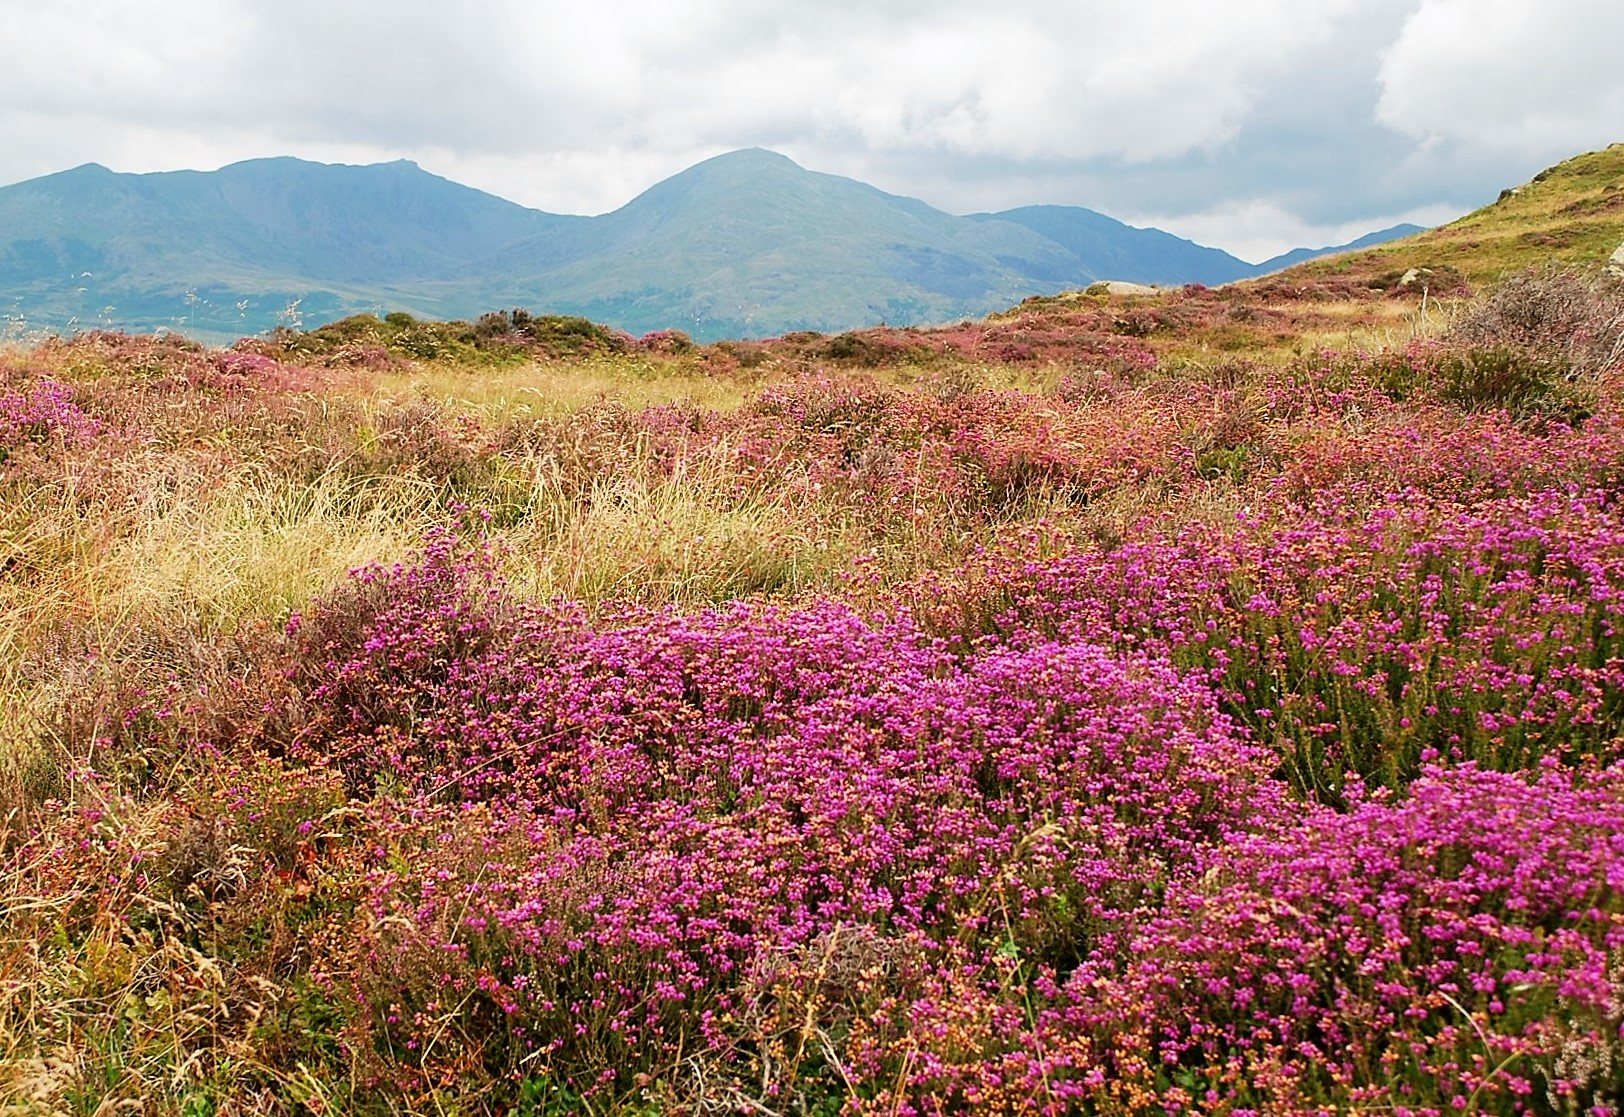 Lovely image of heather on the Coniston Fells